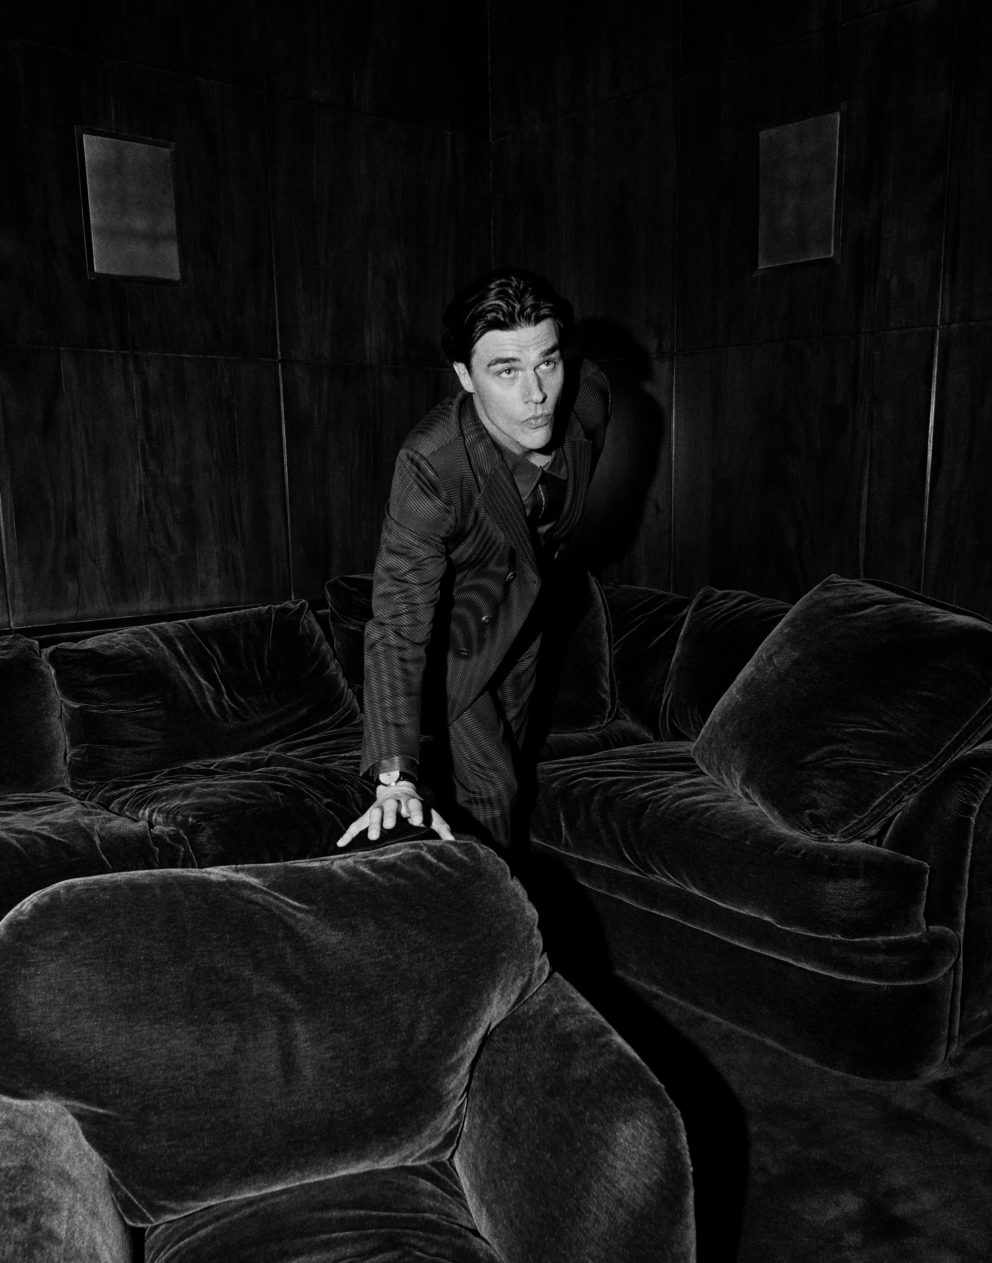 201026 0060 Esquire Finn Wittrock 064 By Christian Hogstedt